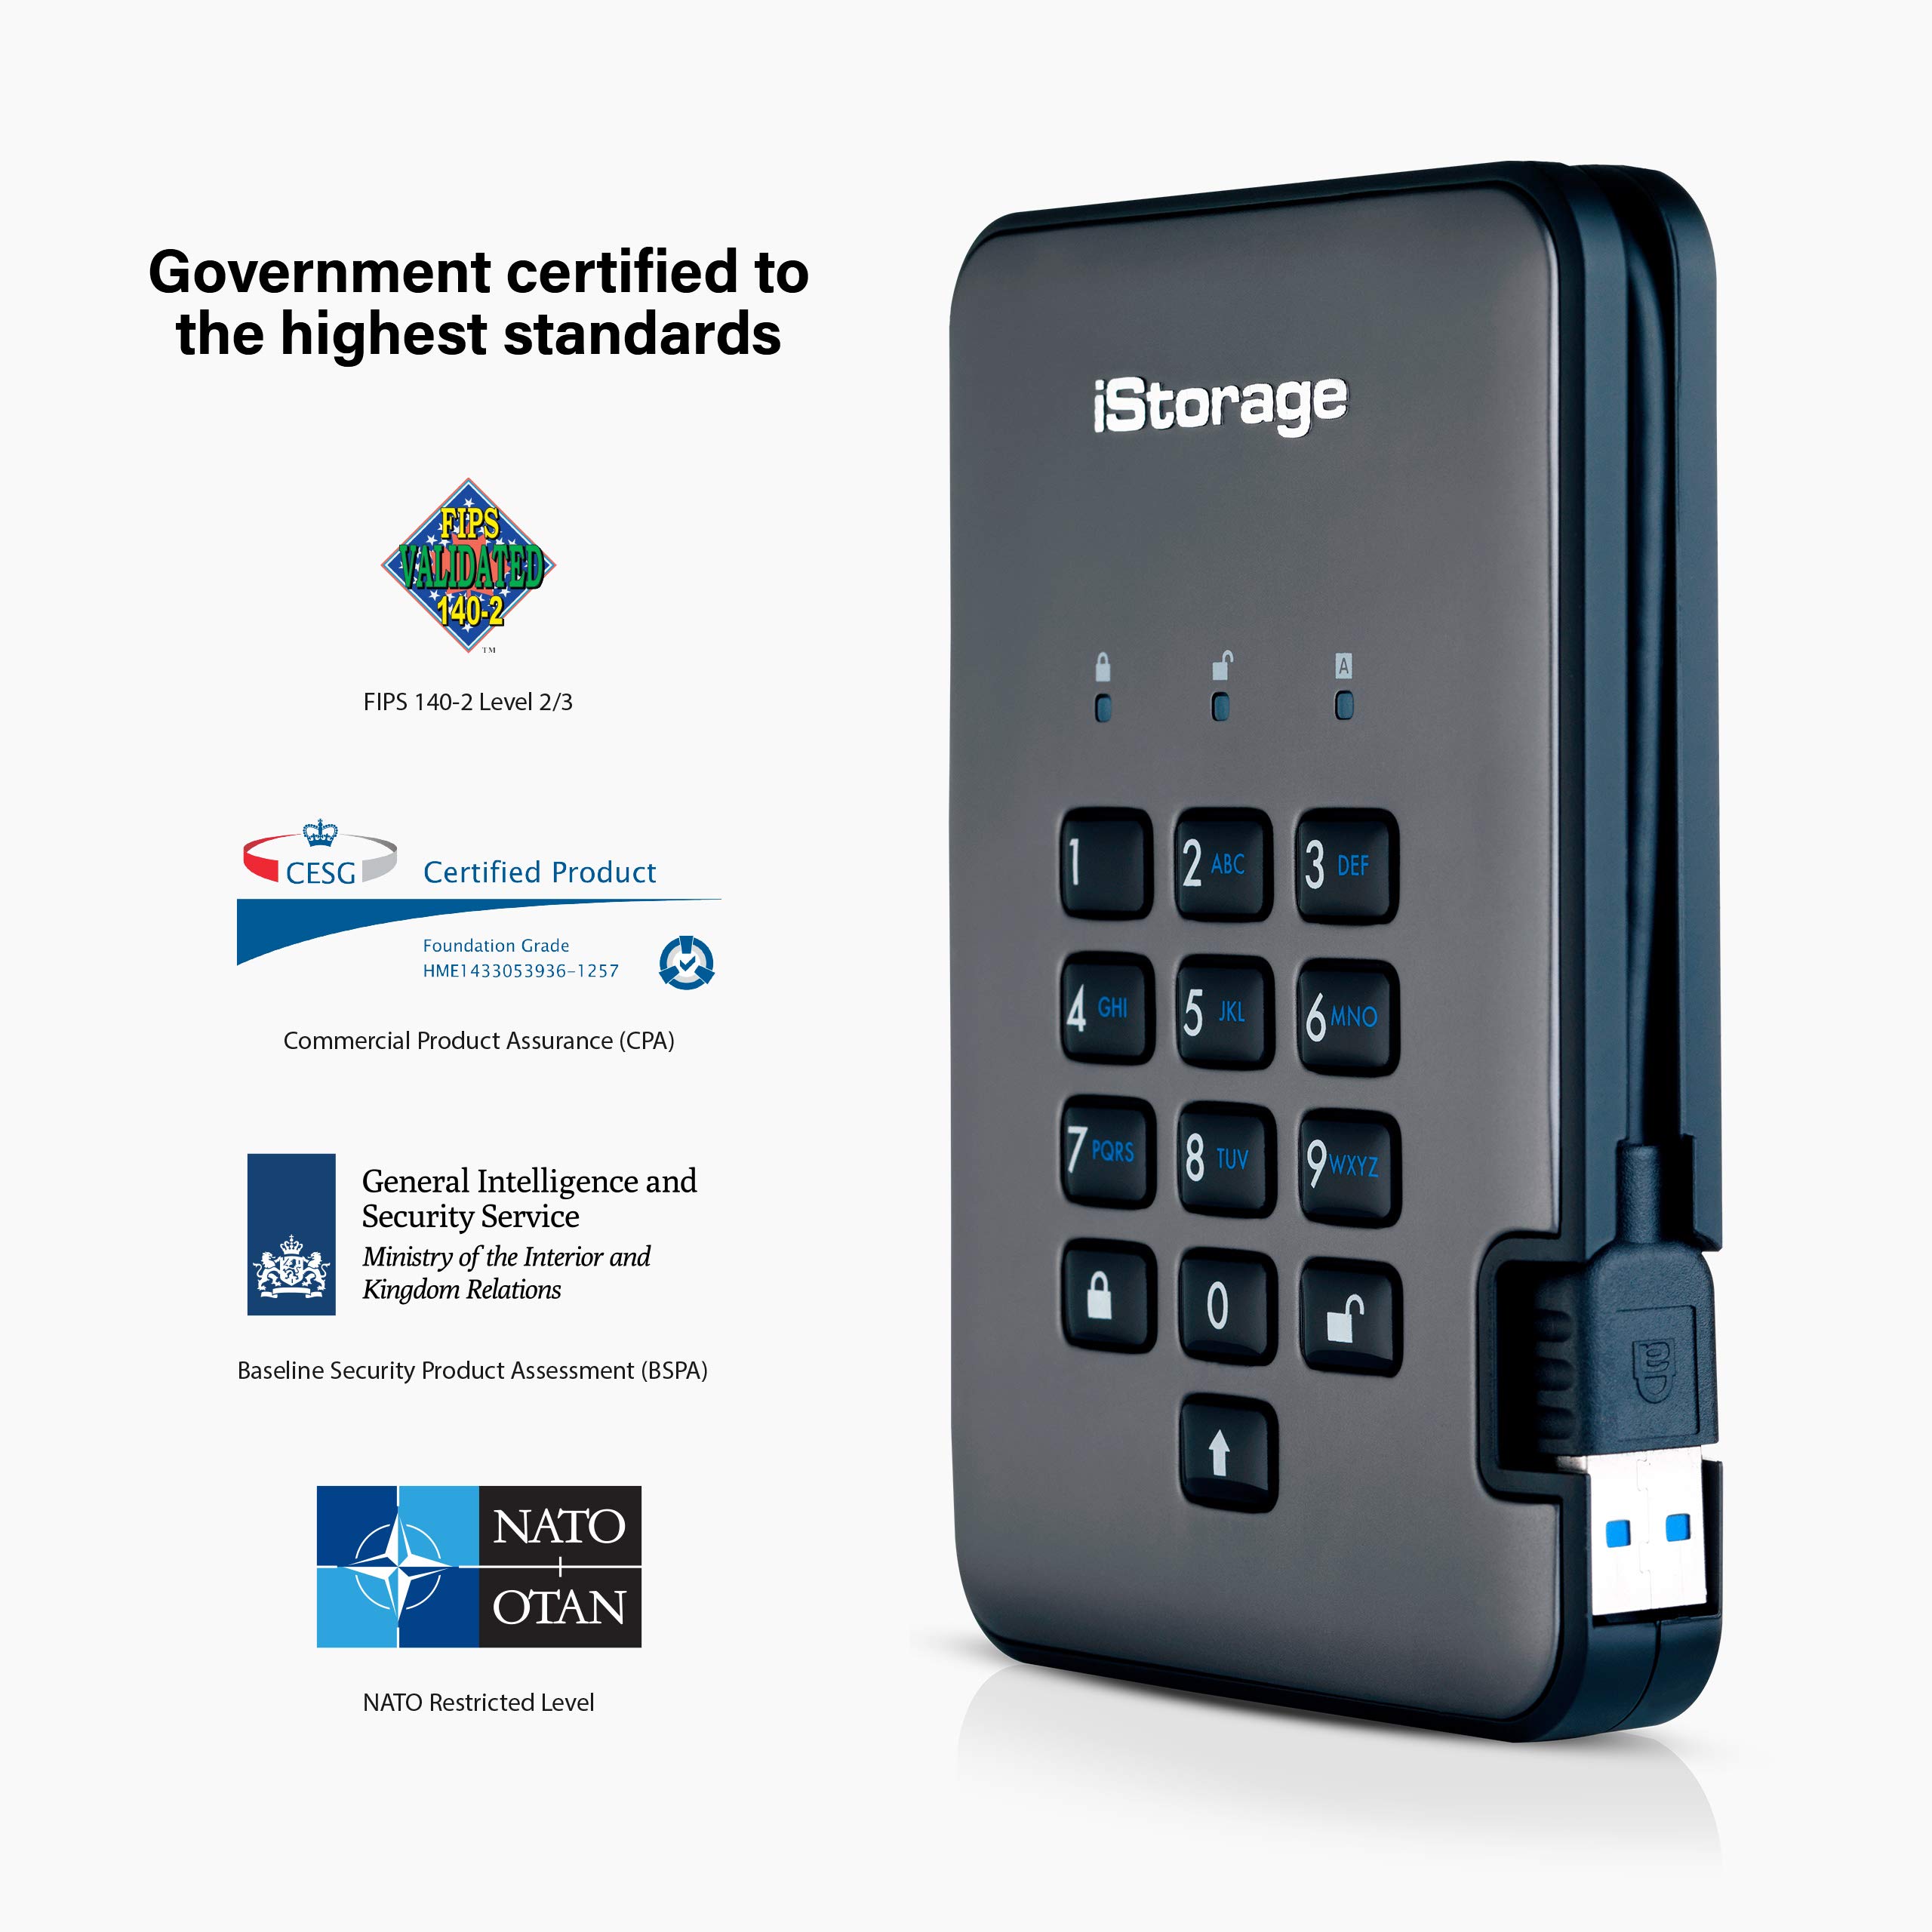 iStorage diskAshur PRO2 HDD 500 GB | Secure Hard Drive | FIPS Level 2 certified | Password Protected | Dust/Water Resistant. IS-DAP2-256-500-C-G